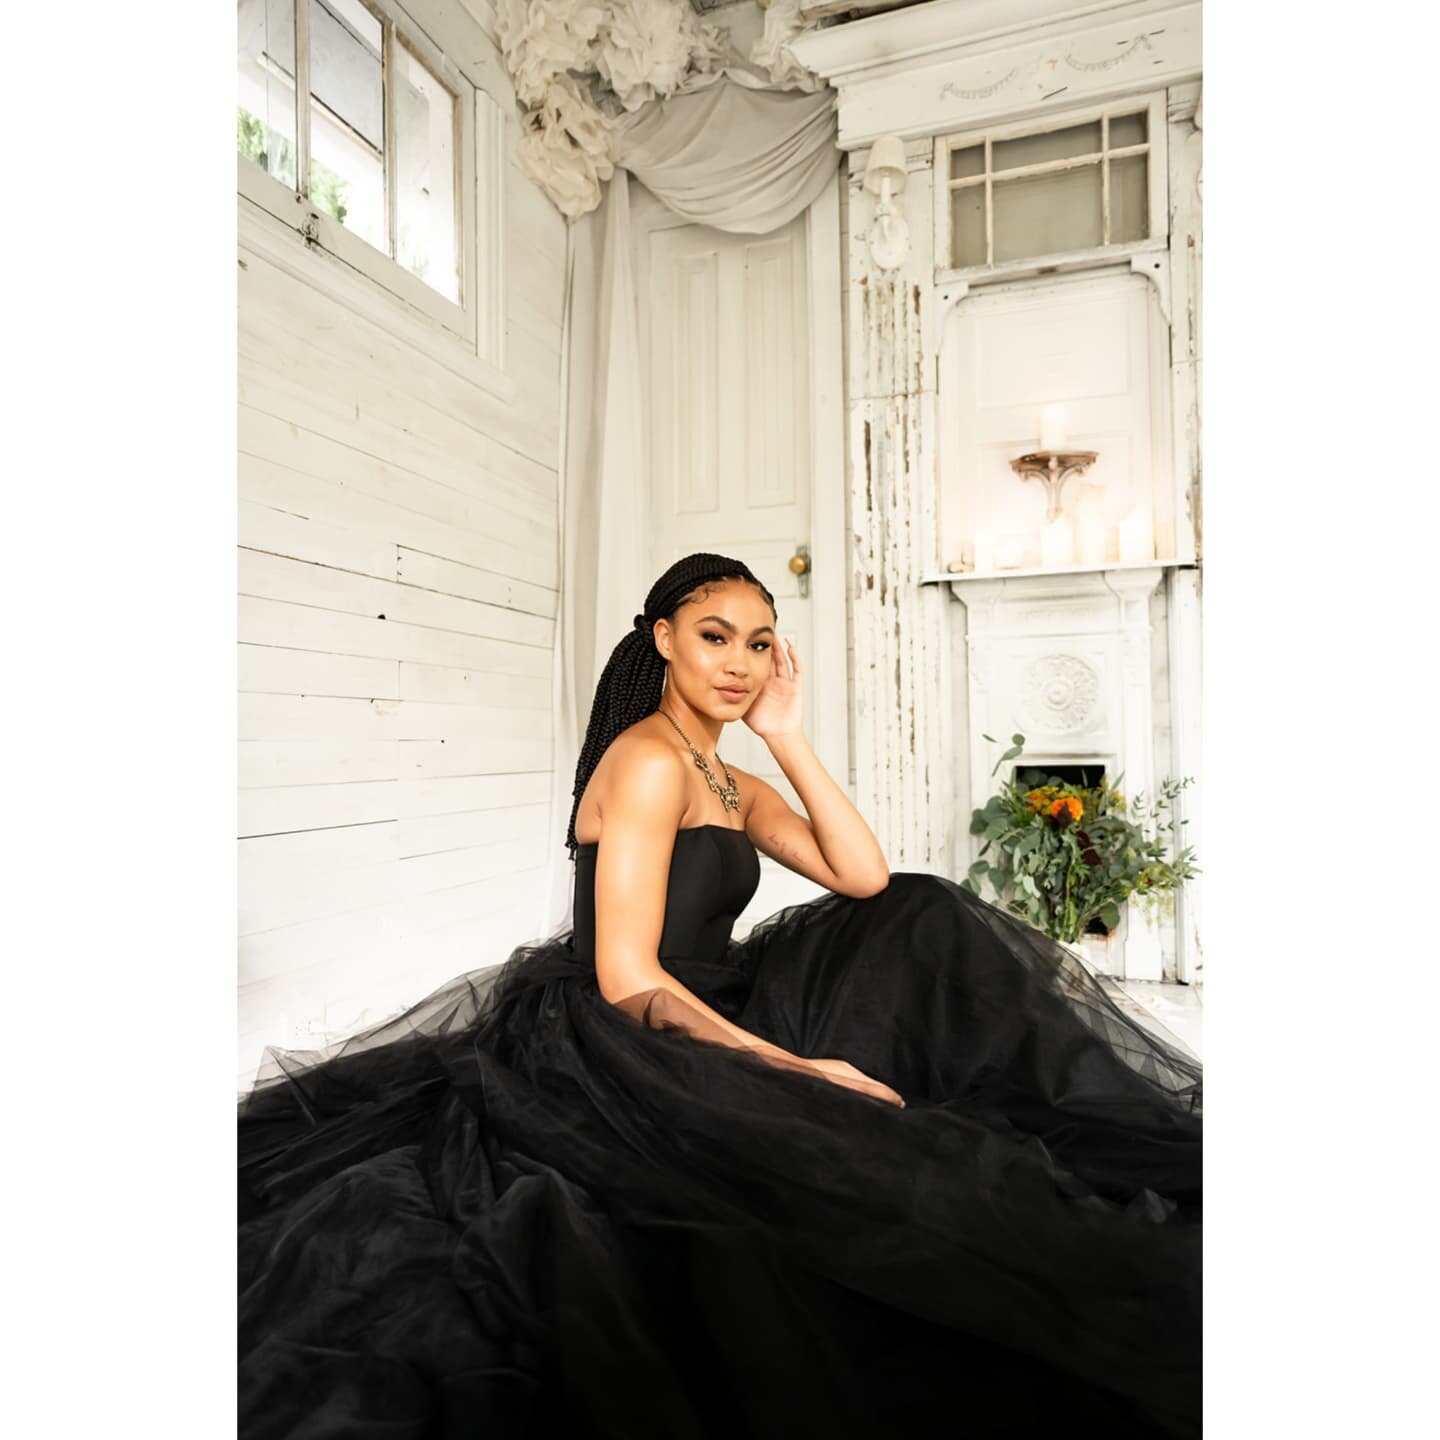 Usually I post my sessions in chronological order of when I shoot them but Ive been dying to post these images from the styled shoot I did with @frenchknotcouture especially with all of her amazing black dresses she has designed! This is tye Twilight